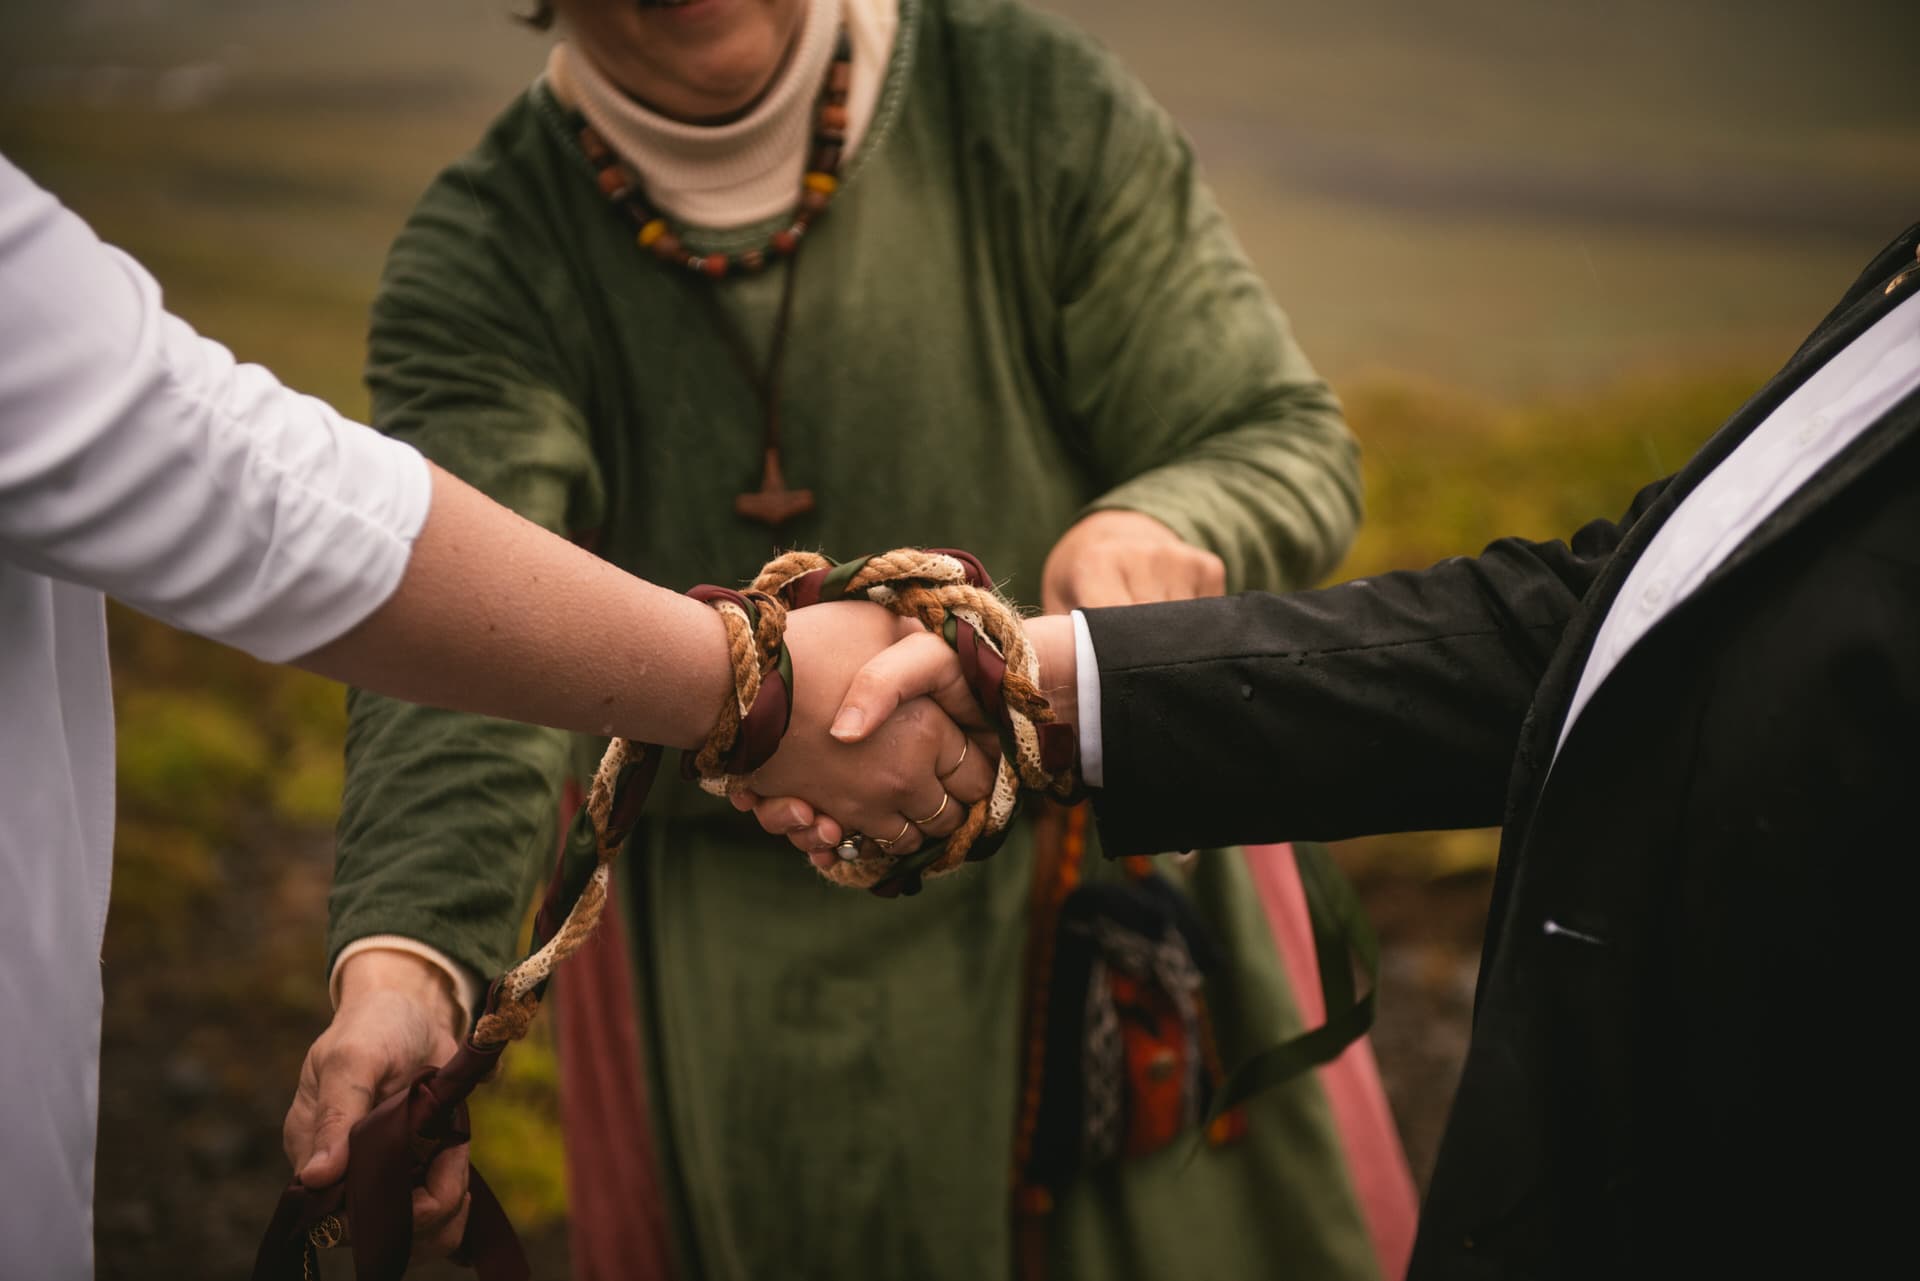 Detail of a handfasting ceremony during a Pagan wedding ceremony in Iceland